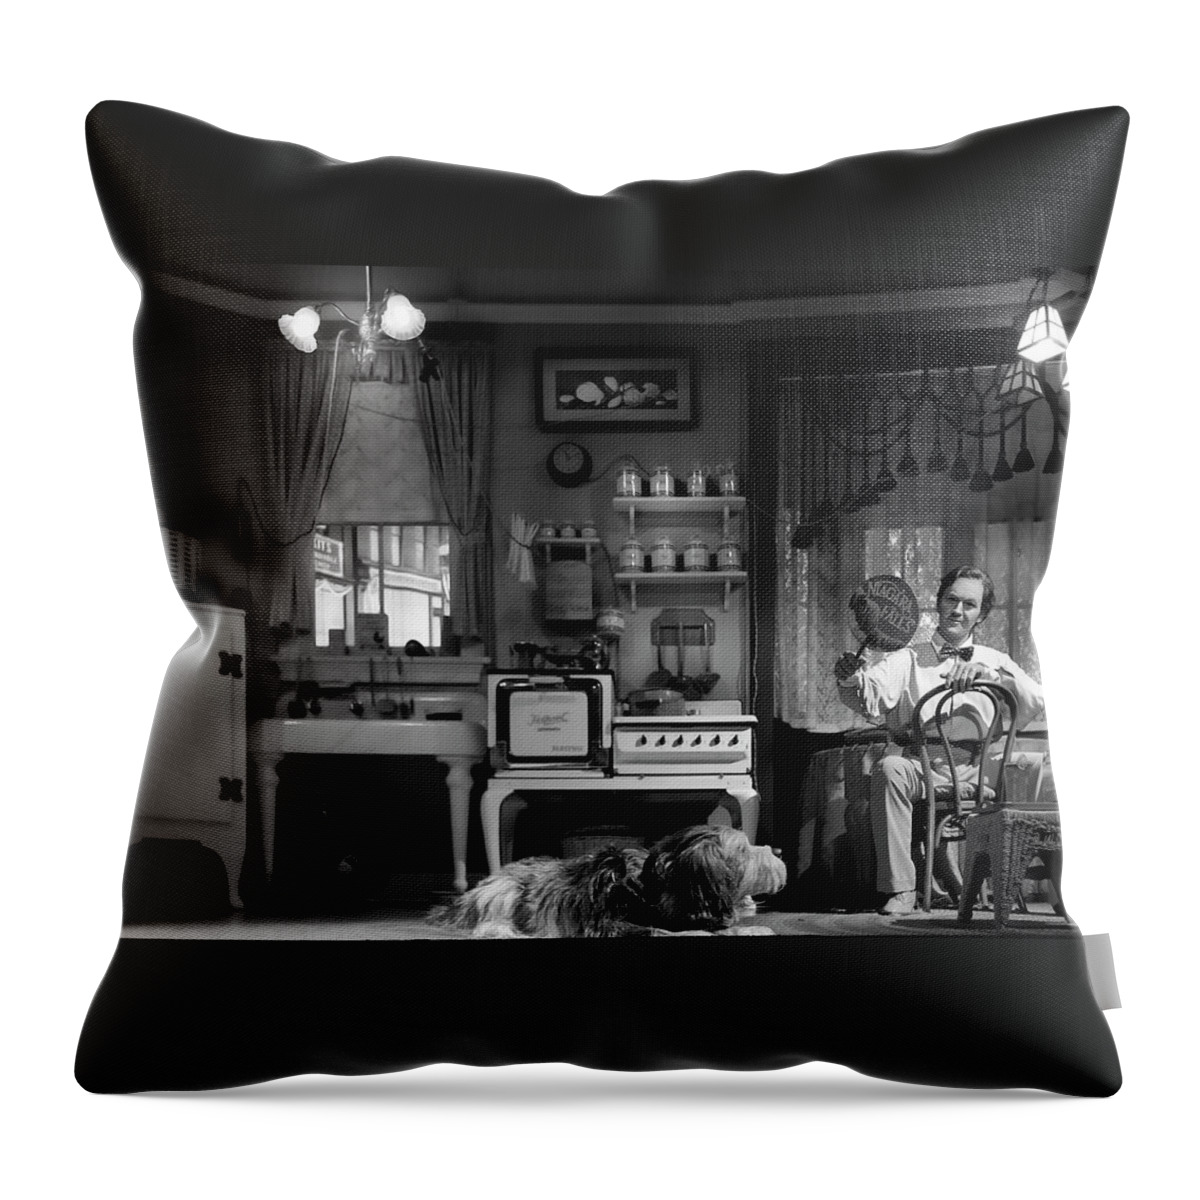 Carousel Of Progress Throw Pillow featuring the photograph Carousel of Progress Scene 4 by Mark Andrew Thomas